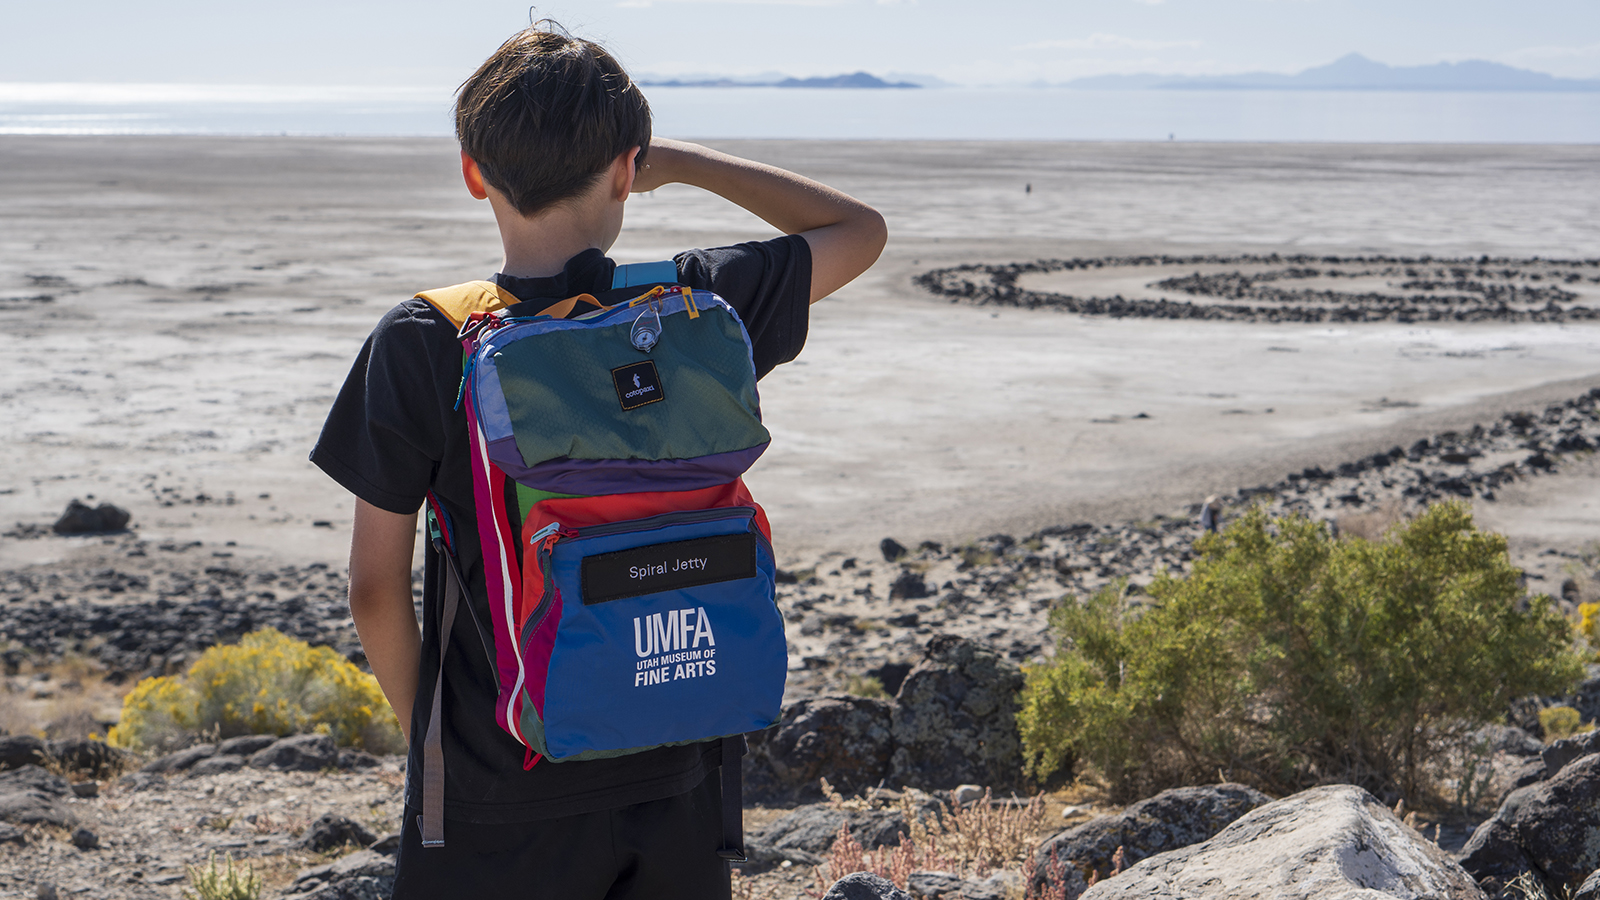 a boy about 10 years old stands on a hill overlooking Great Salt Lake and the Spiral Jetty he is wearing a bright multi backpack